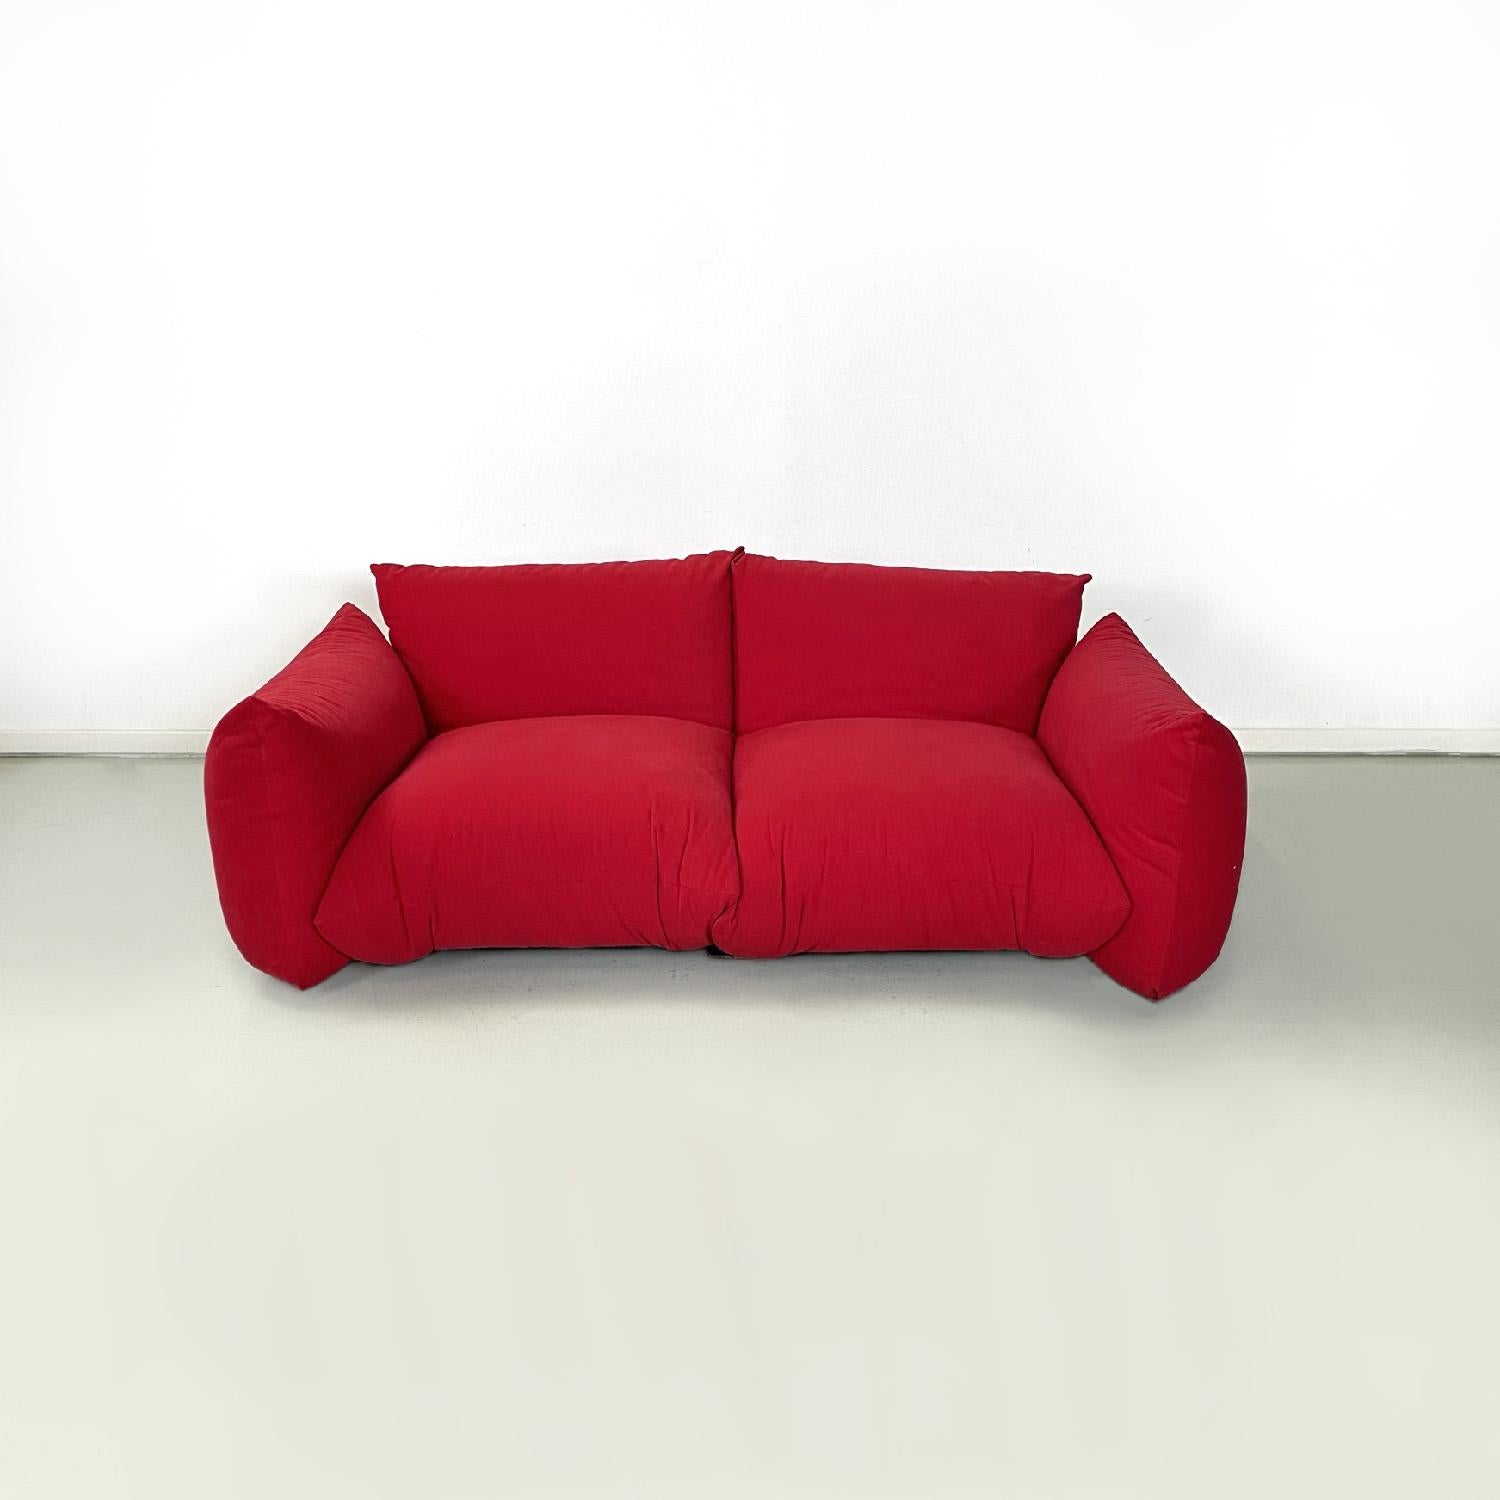 Italian modern red living room Marenco by Mario Marenco for Arflex, 1970s
Living room composed of two two-seater sofas and an armchair mod. Marenco. The rectangular seats of the sofas are composed of two padded cushions covered in red alcantara type